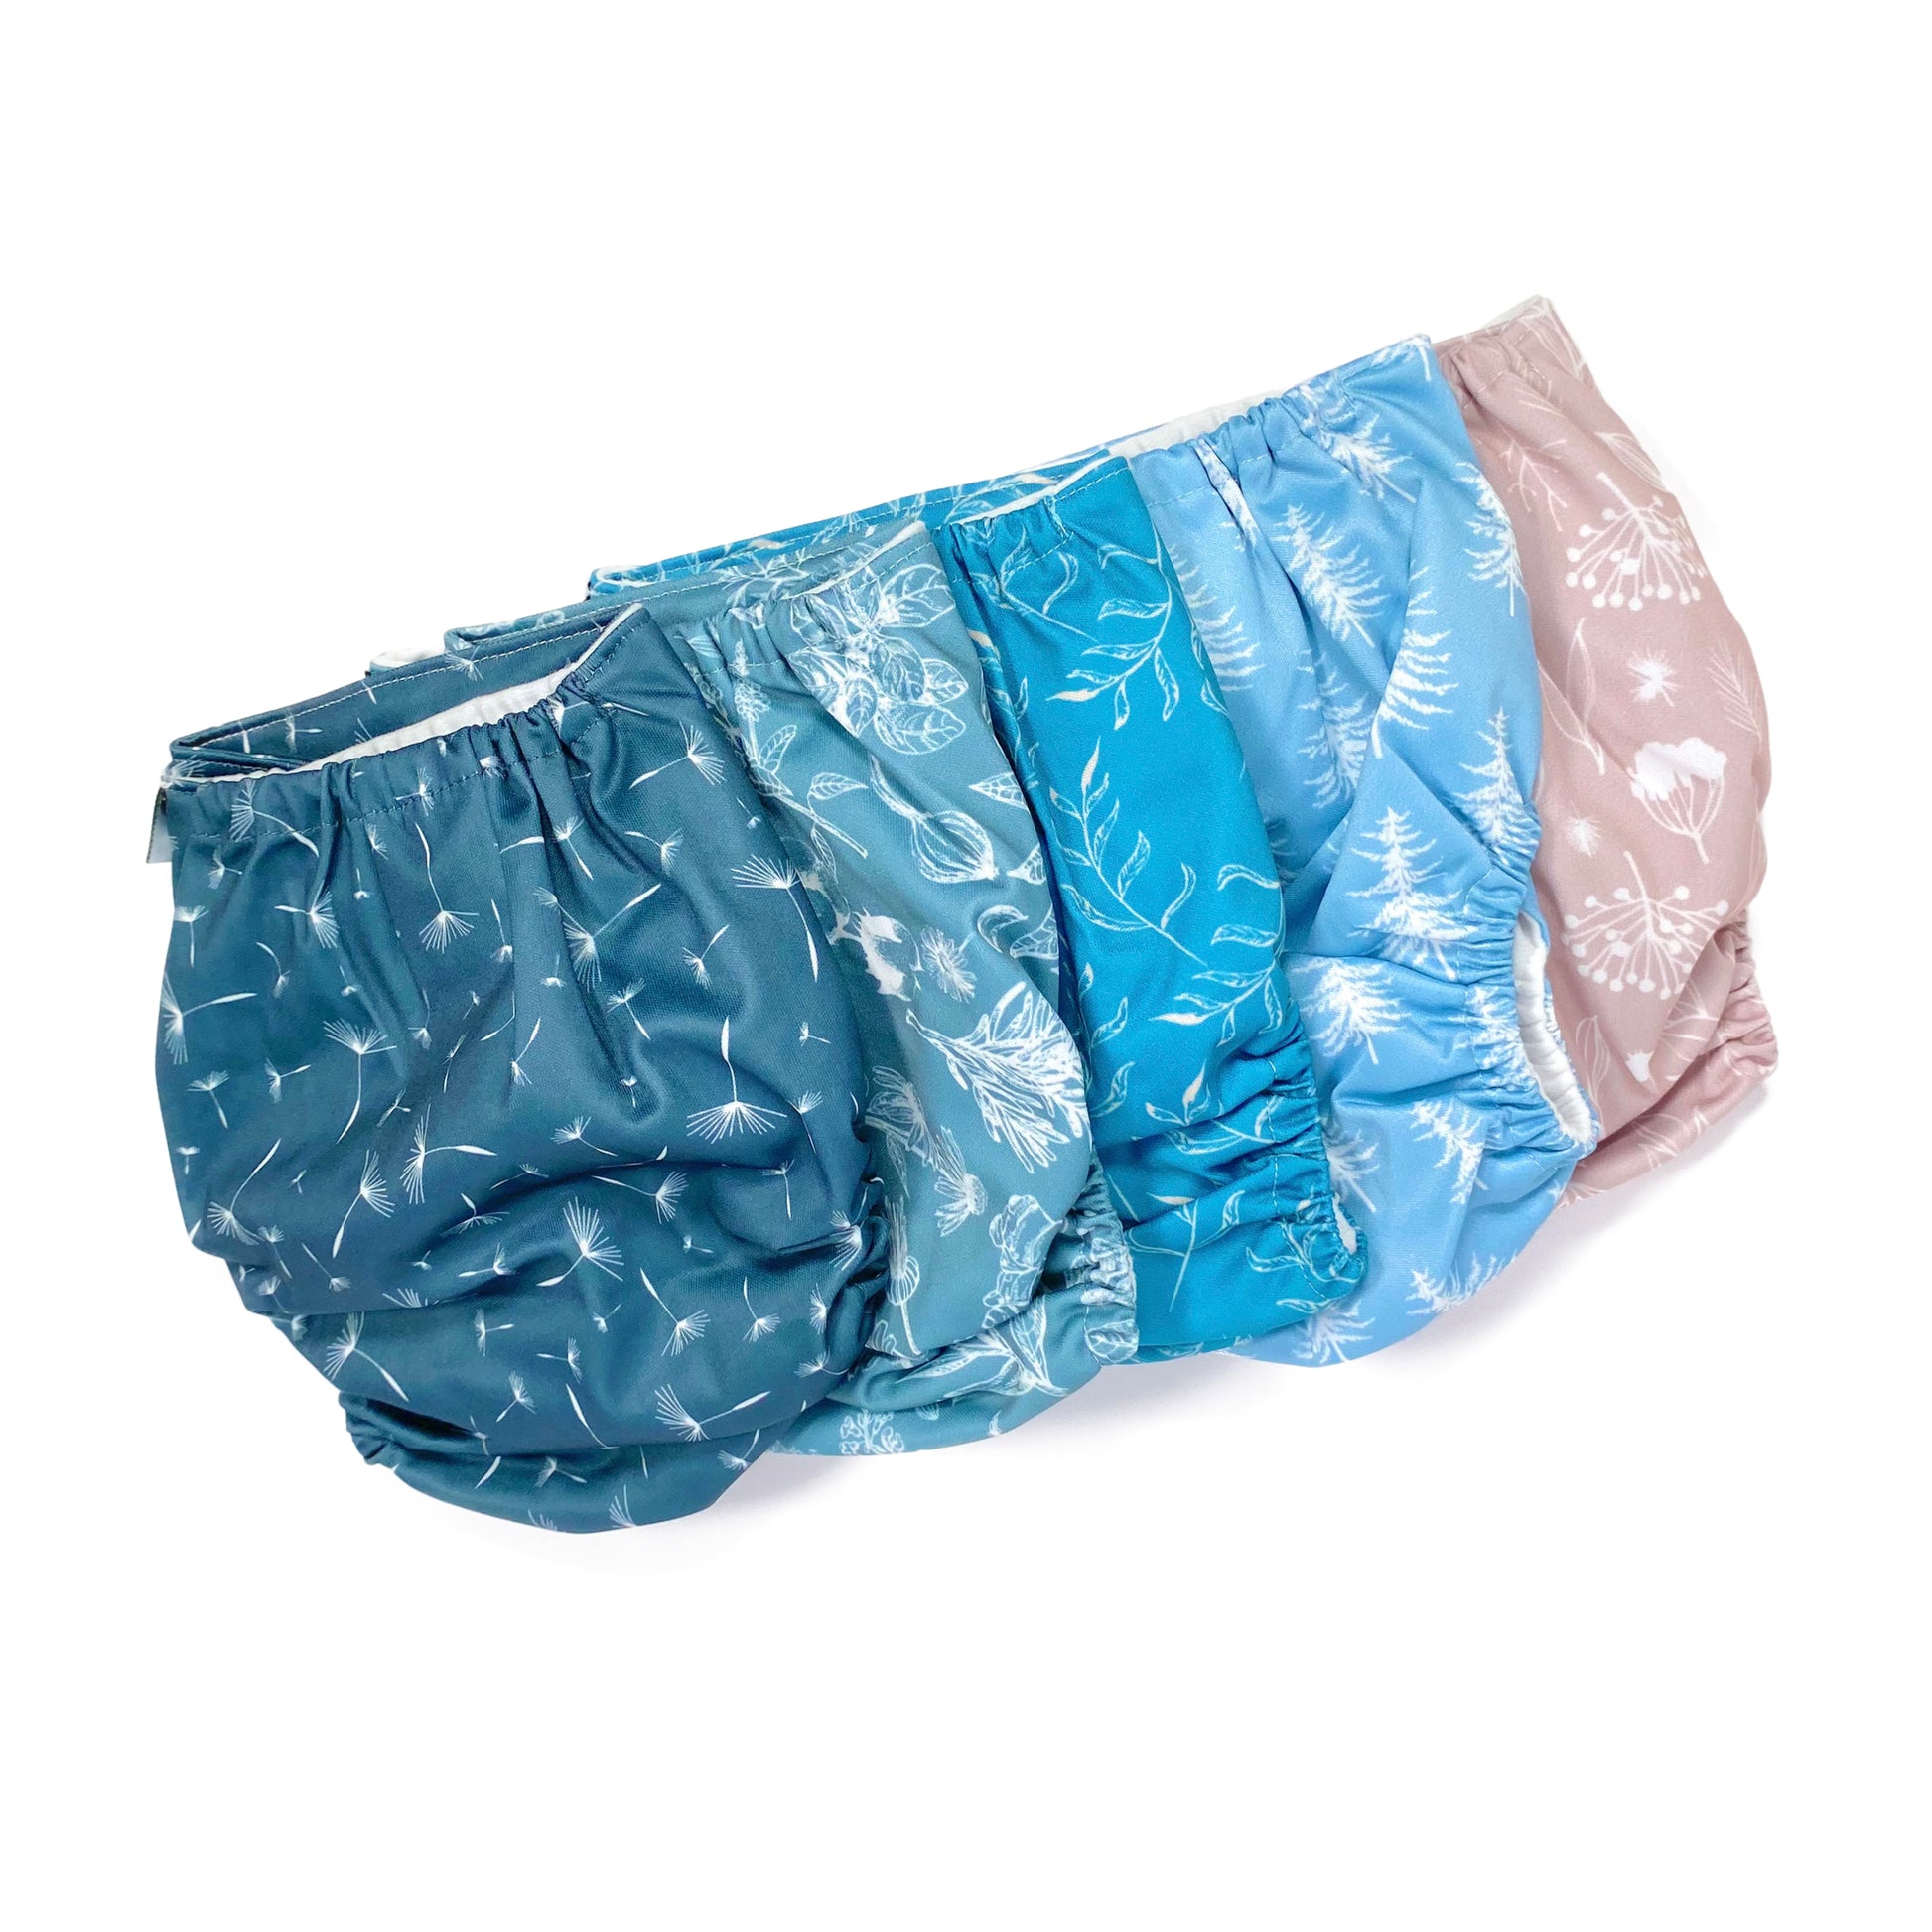 A set of five reusable nappies, made from 100% recycled polyester. The included nappies are: Wild Lilac, Cool Pines, Blue Fern, Blue Harvest and Midnight Breeze. View shows all five nappies back facing, in a diagonal line.